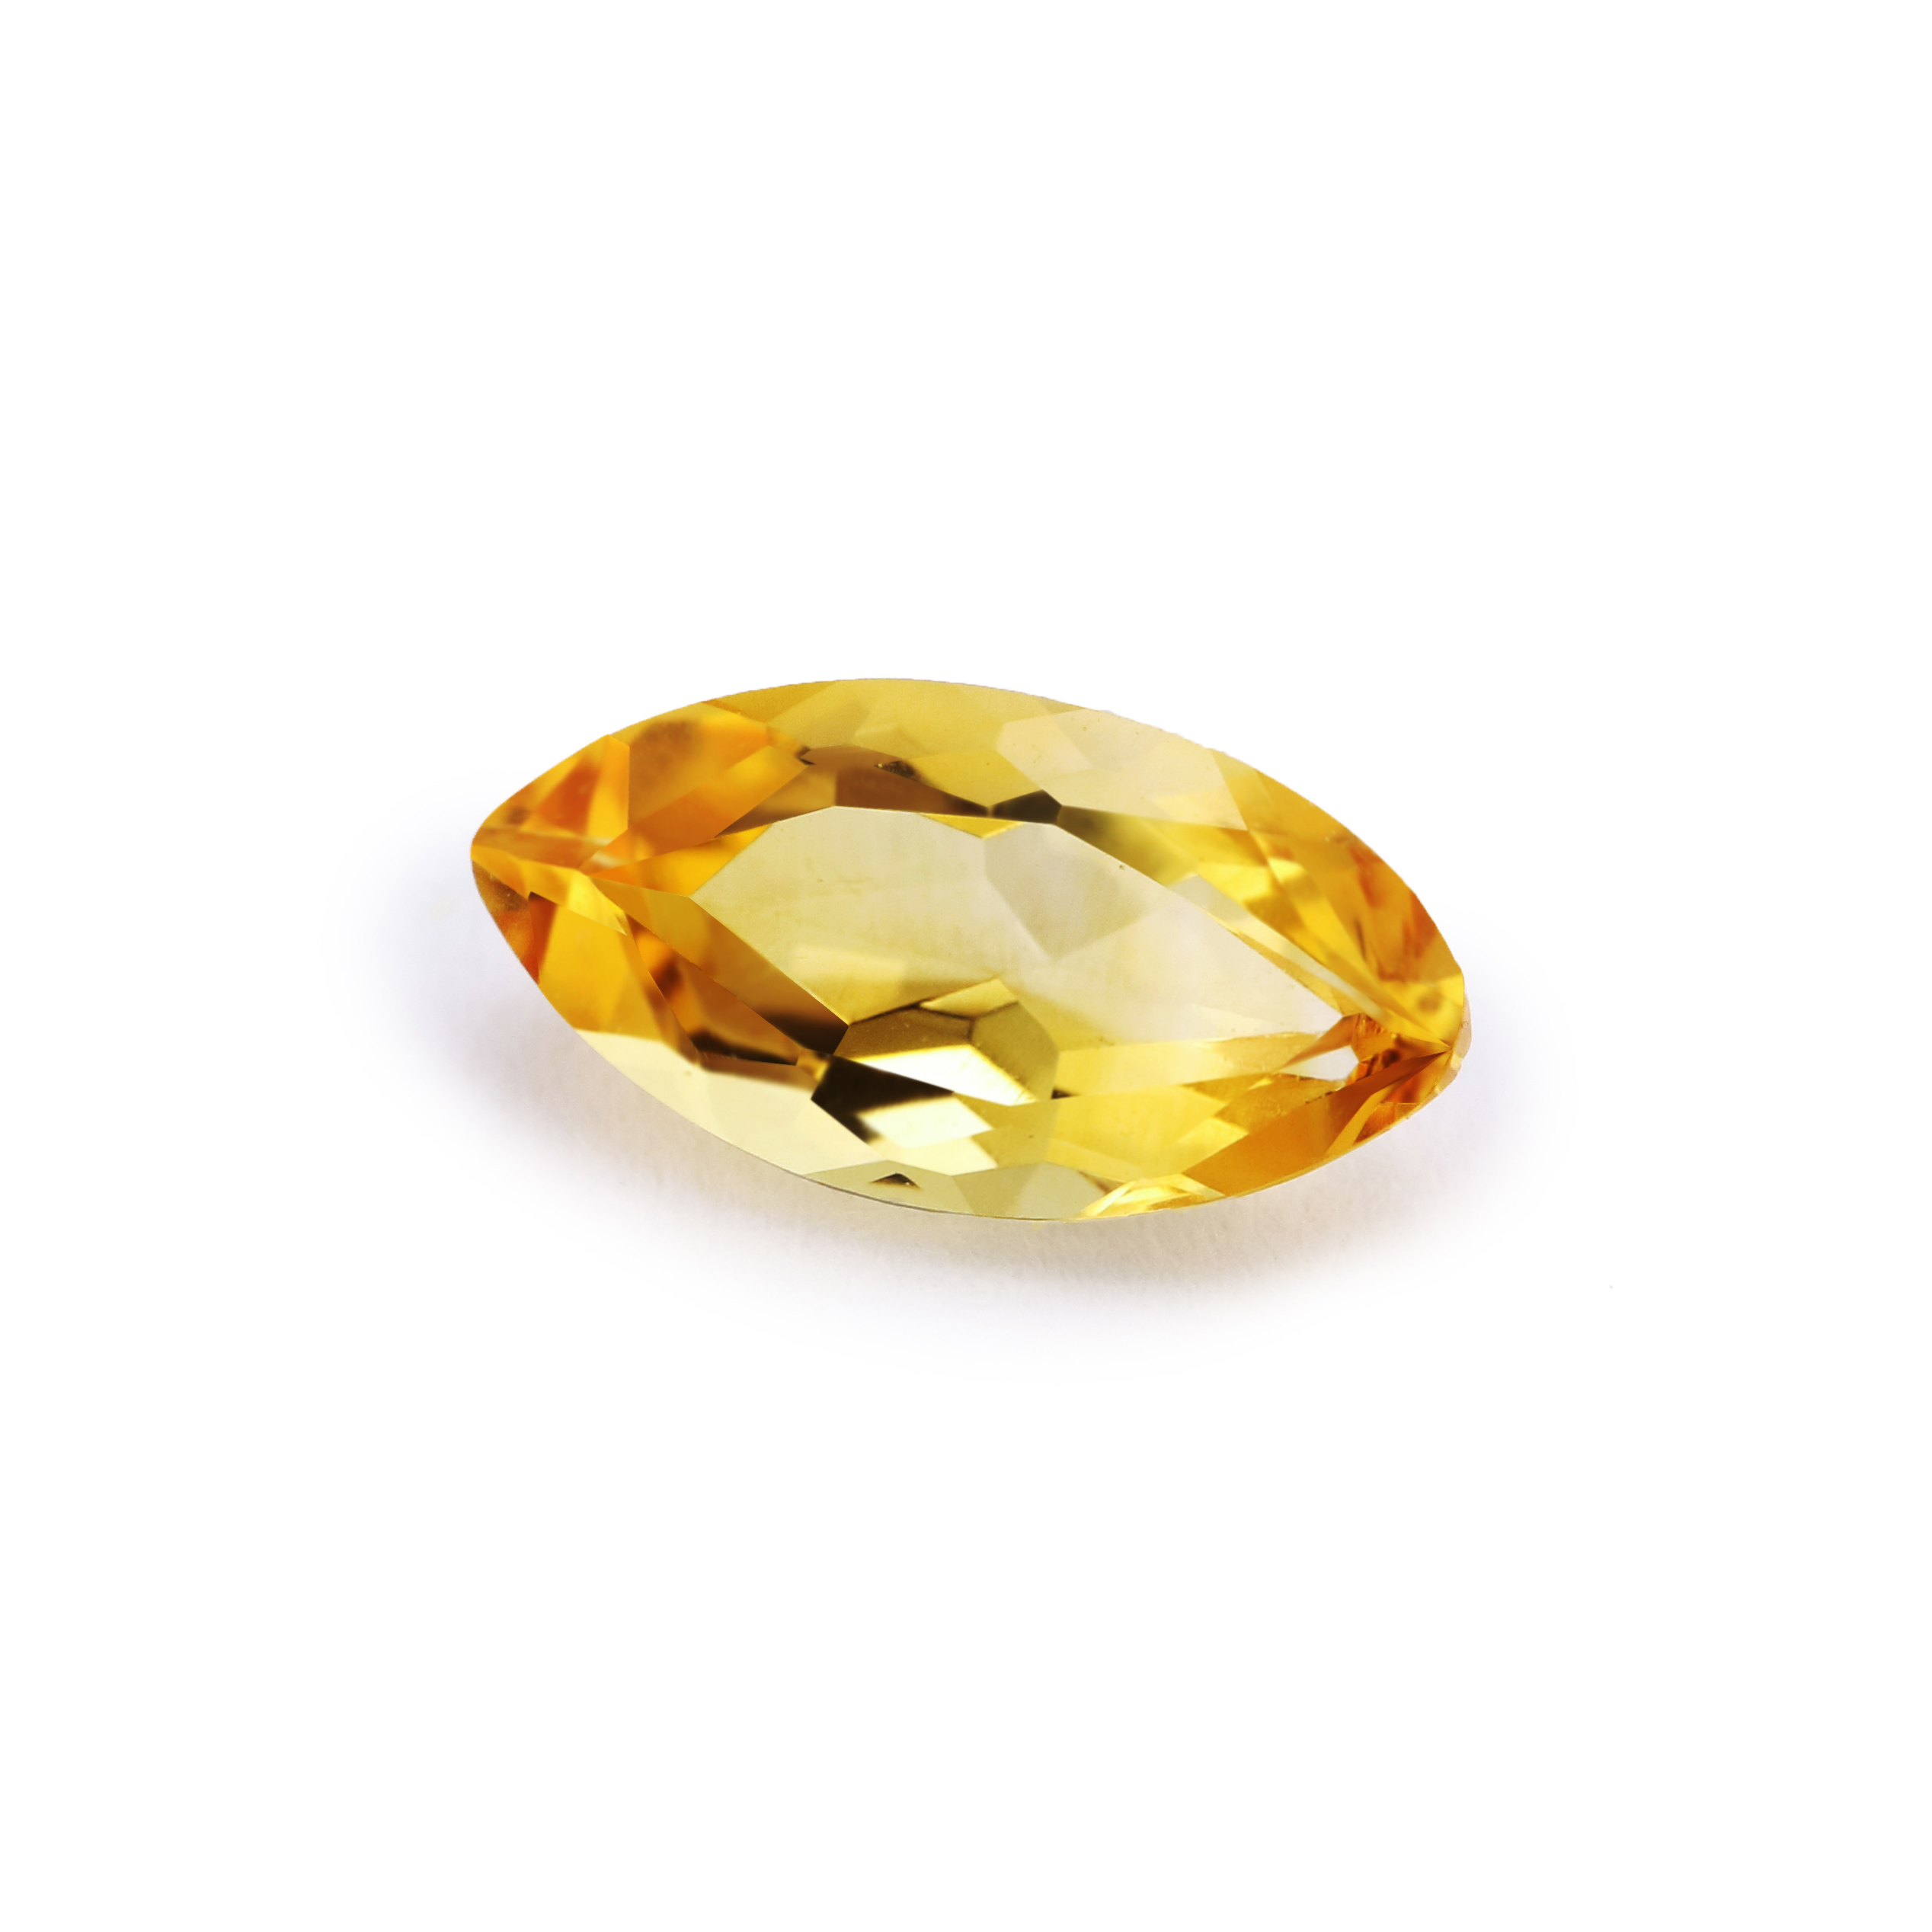 1Pcs Marquise Yellow Citrine November Birthstone Faceted Cut Loose Gemstone Natural Semi Precious Stone DIY Jewelry Supplies 4120131 - Click Image to Close